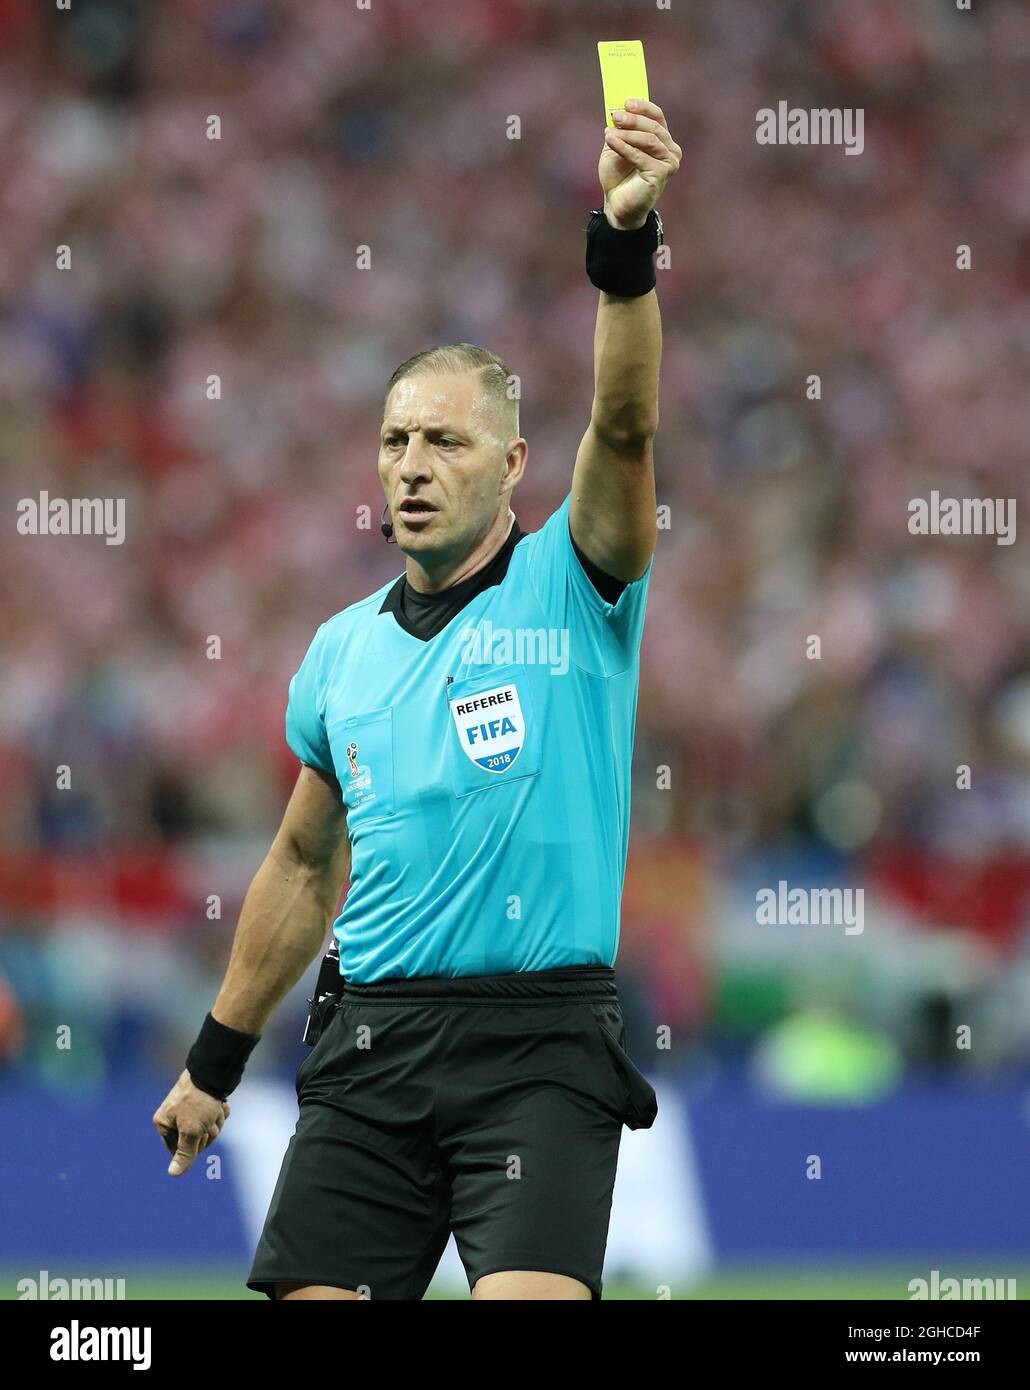 Referee Nestor Pitana during the FIFA World Cup 2018 Final at the Luzhniki Stadium, Moscow. Picture date 15th July 2018. Picture credit should read: David Klein/Sportimage via PA Images Stock Photo